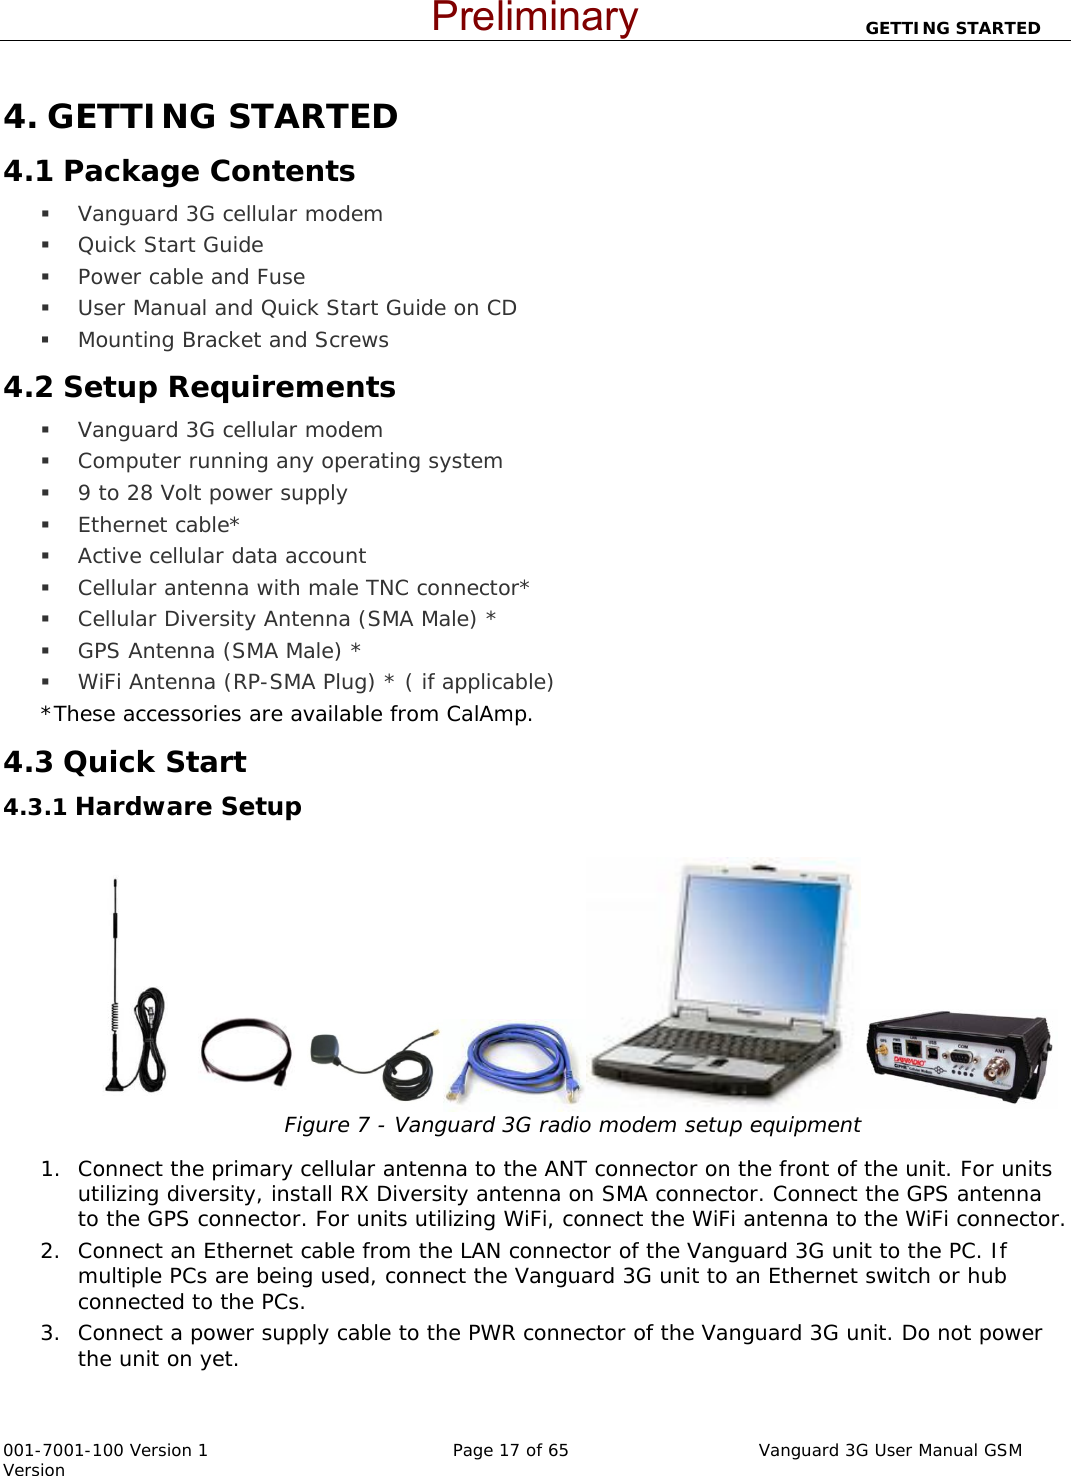                          GETTING STARTED  001-7001-100 Version 1       Page 17 of 65       Vanguard 3G User Manual GSM Version 4. GETTING STARTED 4.1 Package Contents  Vanguard 3G cellular modem  Quick Start Guide  Power cable and Fuse  User Manual and Quick Start Guide on CD  Mounting Bracket and Screws 4.2 Setup Requirements  Vanguard 3G cellular modem  Computer running any operating system  9 to 28 Volt power supply   Ethernet cable*  Active cellular data account   Cellular antenna with male TNC connector*  Cellular Diversity Antenna (SMA Male) *  GPS Antenna (SMA Male) *  WiFi Antenna (RP-SMA Plug) * ( if applicable) *These accessories are available from CalAmp. 4.3 Quick Start 4.3.1 Hardware Setup   Figure 7 - Vanguard 3G radio modem setup equipment   1. Connect the primary cellular antenna to the ANT connector on the front of the unit. For units utilizing diversity, install RX Diversity antenna on SMA connector. Connect the GPS antenna to the GPS connector. For units utilizing WiFi, connect the WiFi antenna to the WiFi connector. 2. Connect an Ethernet cable from the LAN connector of the Vanguard 3G unit to the PC. If multiple PCs are being used, connect the Vanguard 3G unit to an Ethernet switch or hub connected to the PCs.   3. Connect a power supply cable to the PWR connector of the Vanguard 3G unit. Do not power the unit on yet.   Preliminary